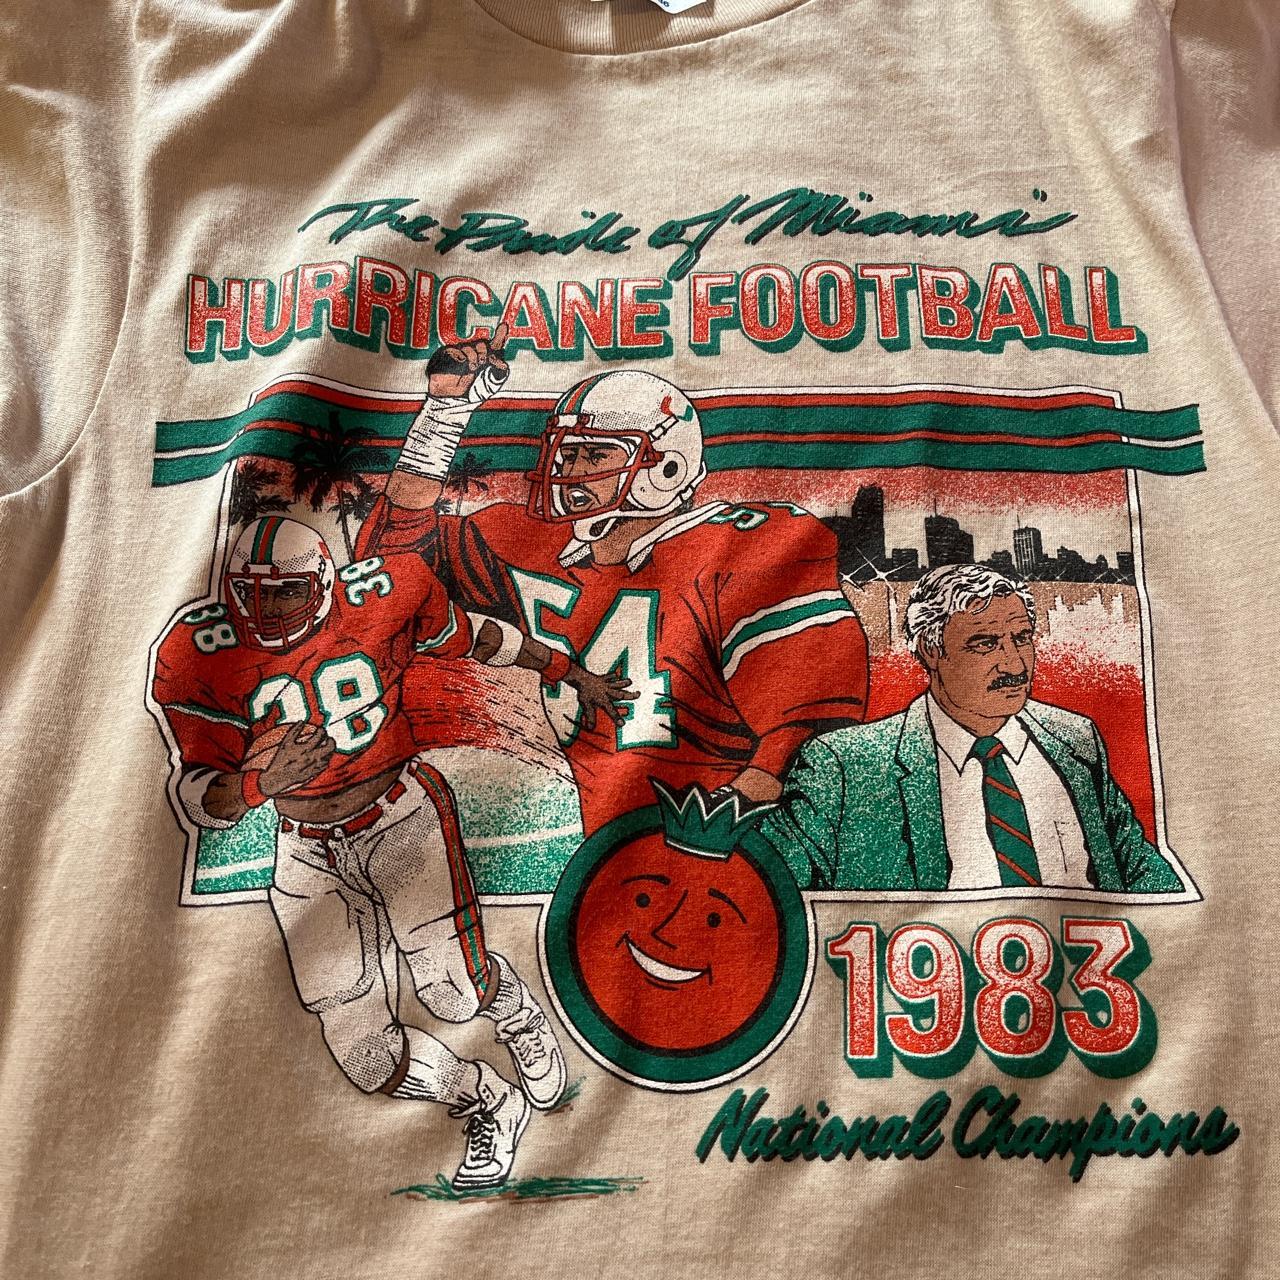 Vintage Miami hurricanes starter double sided shirt - Depop